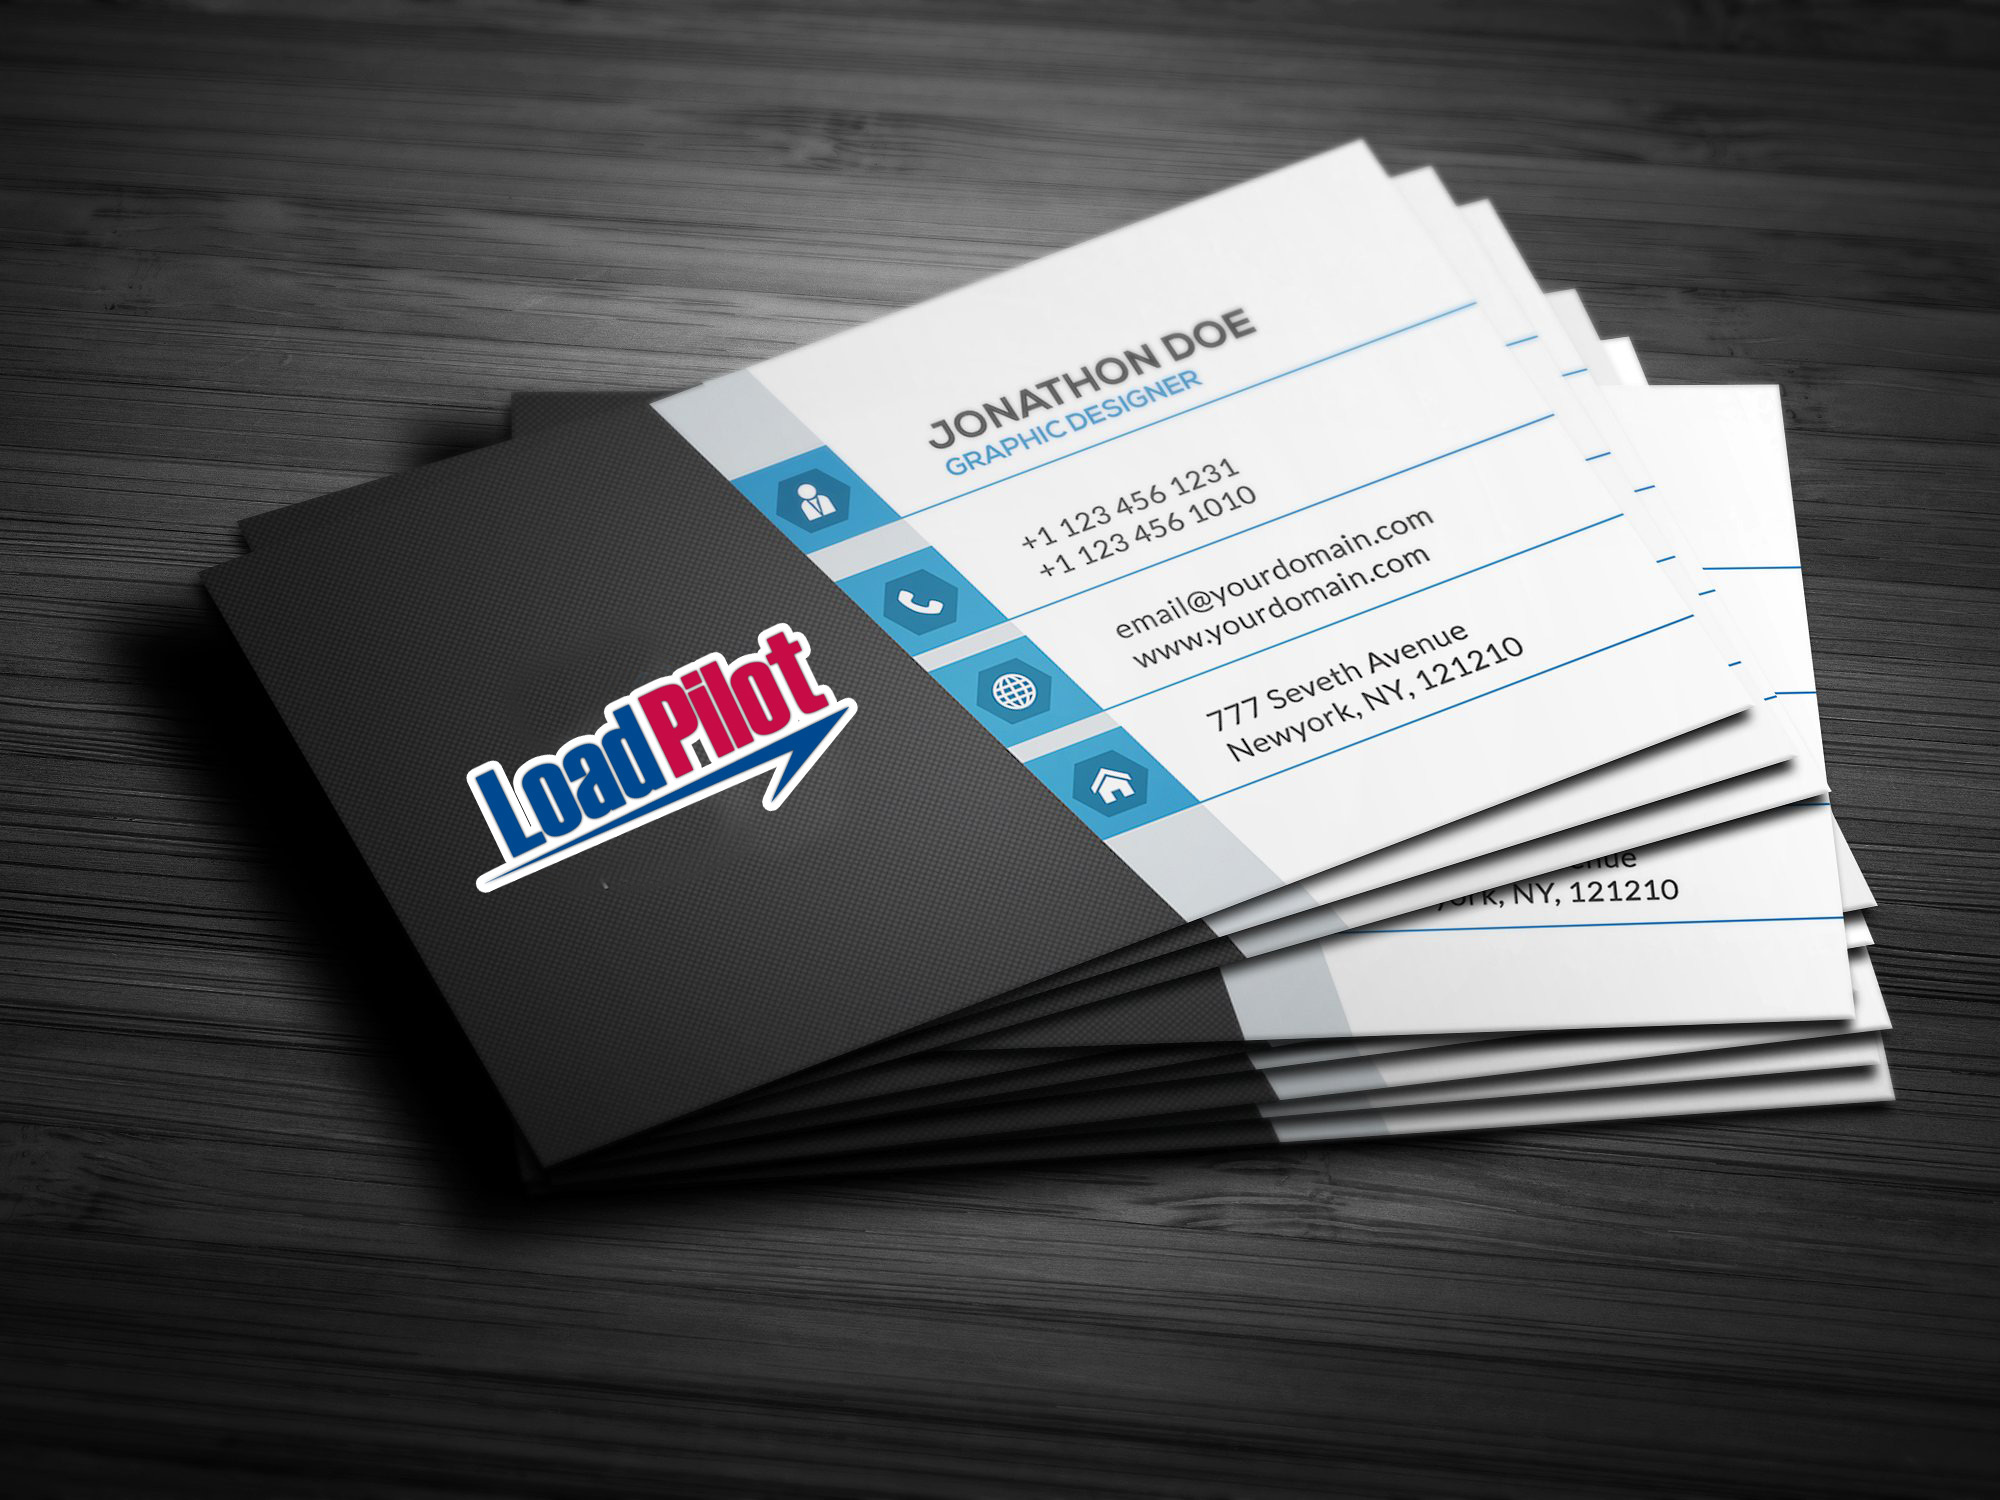 business photo cards 1